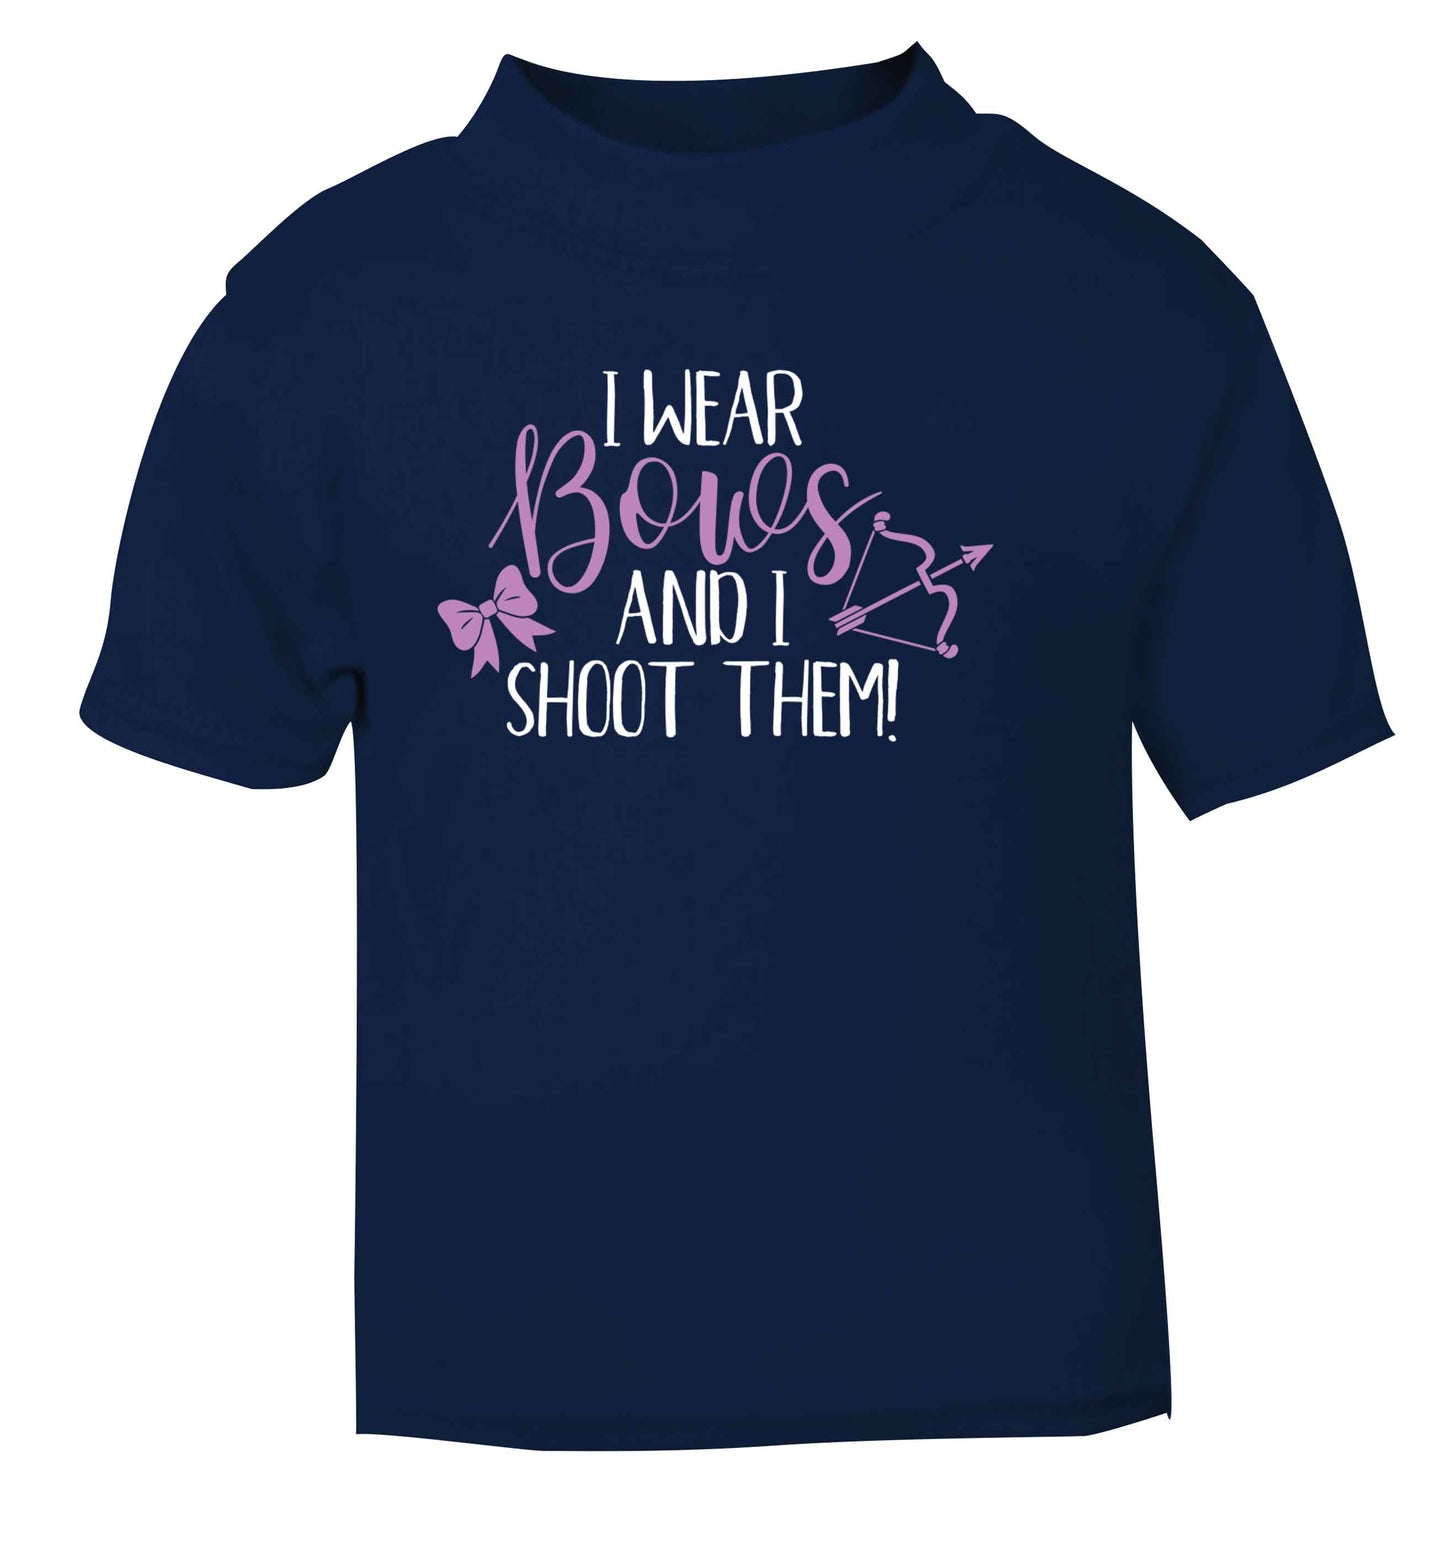 I wear bows and I shoot them navy Baby Toddler Tshirt 2 Years